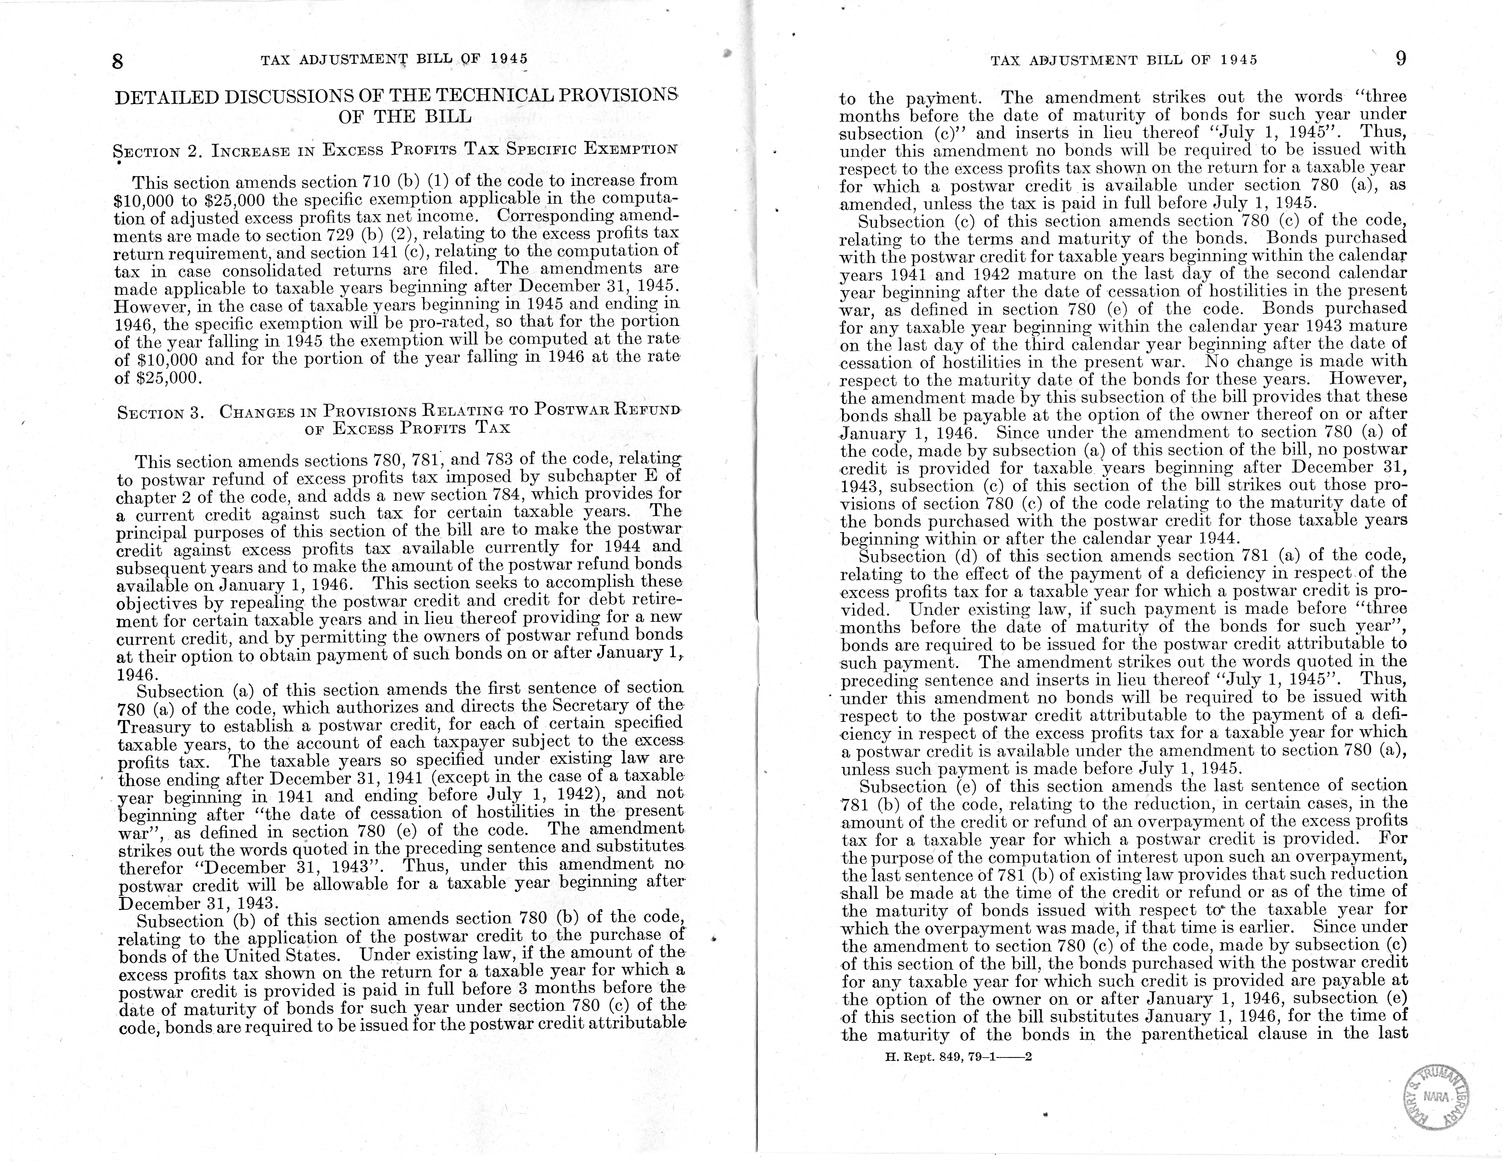 Memorandum from Harold D. Smith to M. C. Latta, H.R. 3633, to Facilitate Reconversion, and for Other Purposes, with Attachments